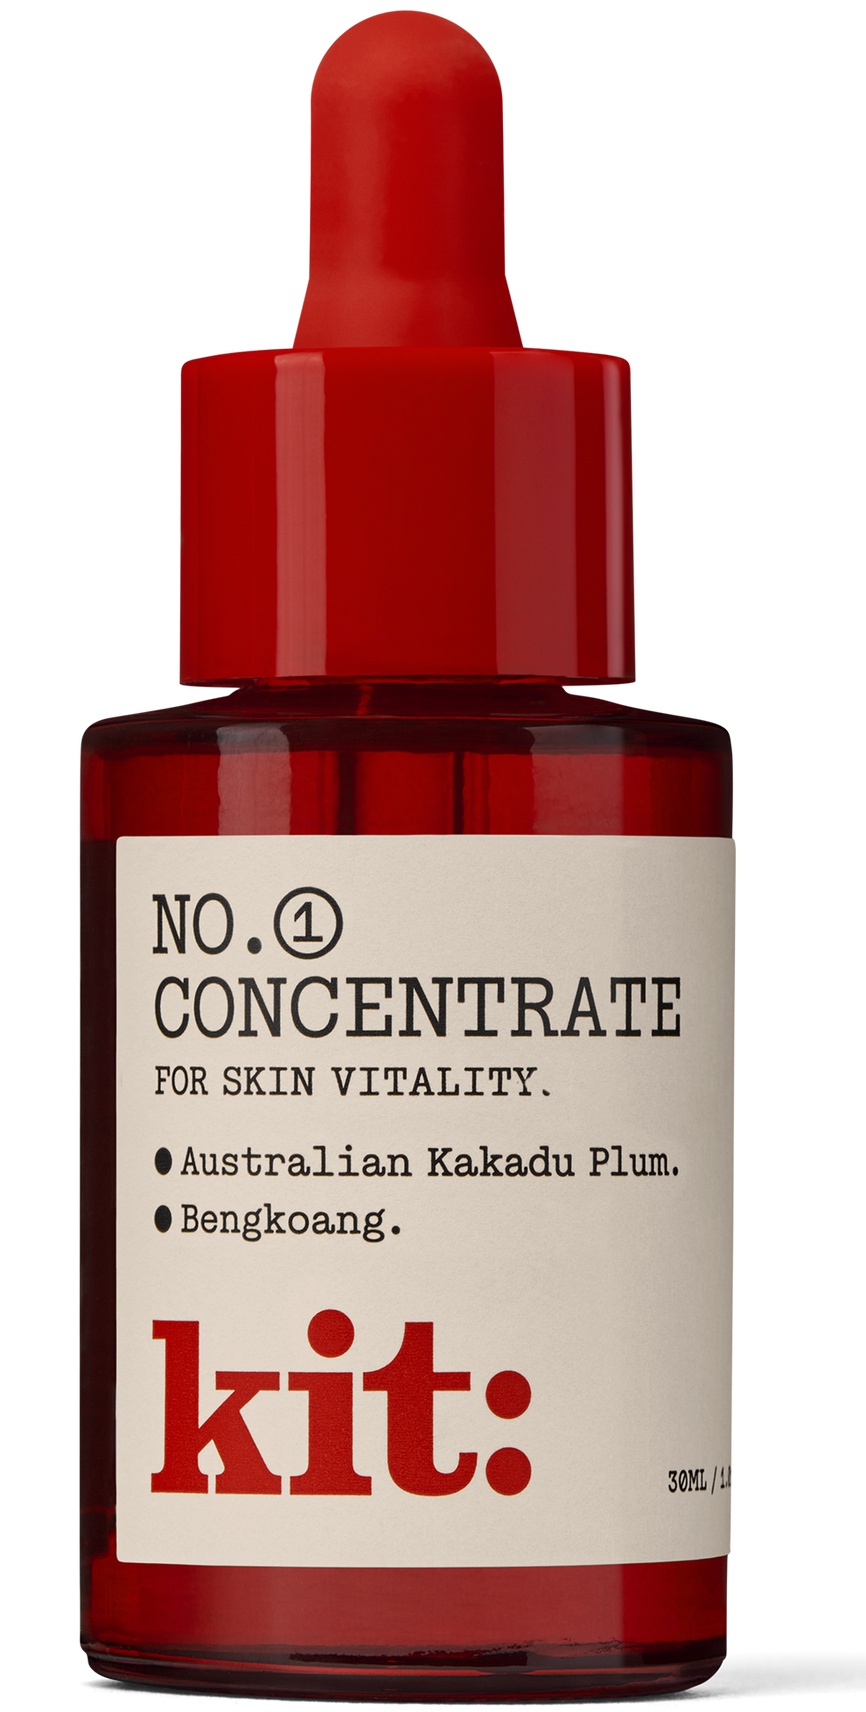 Kit: No. 1 Concentrate